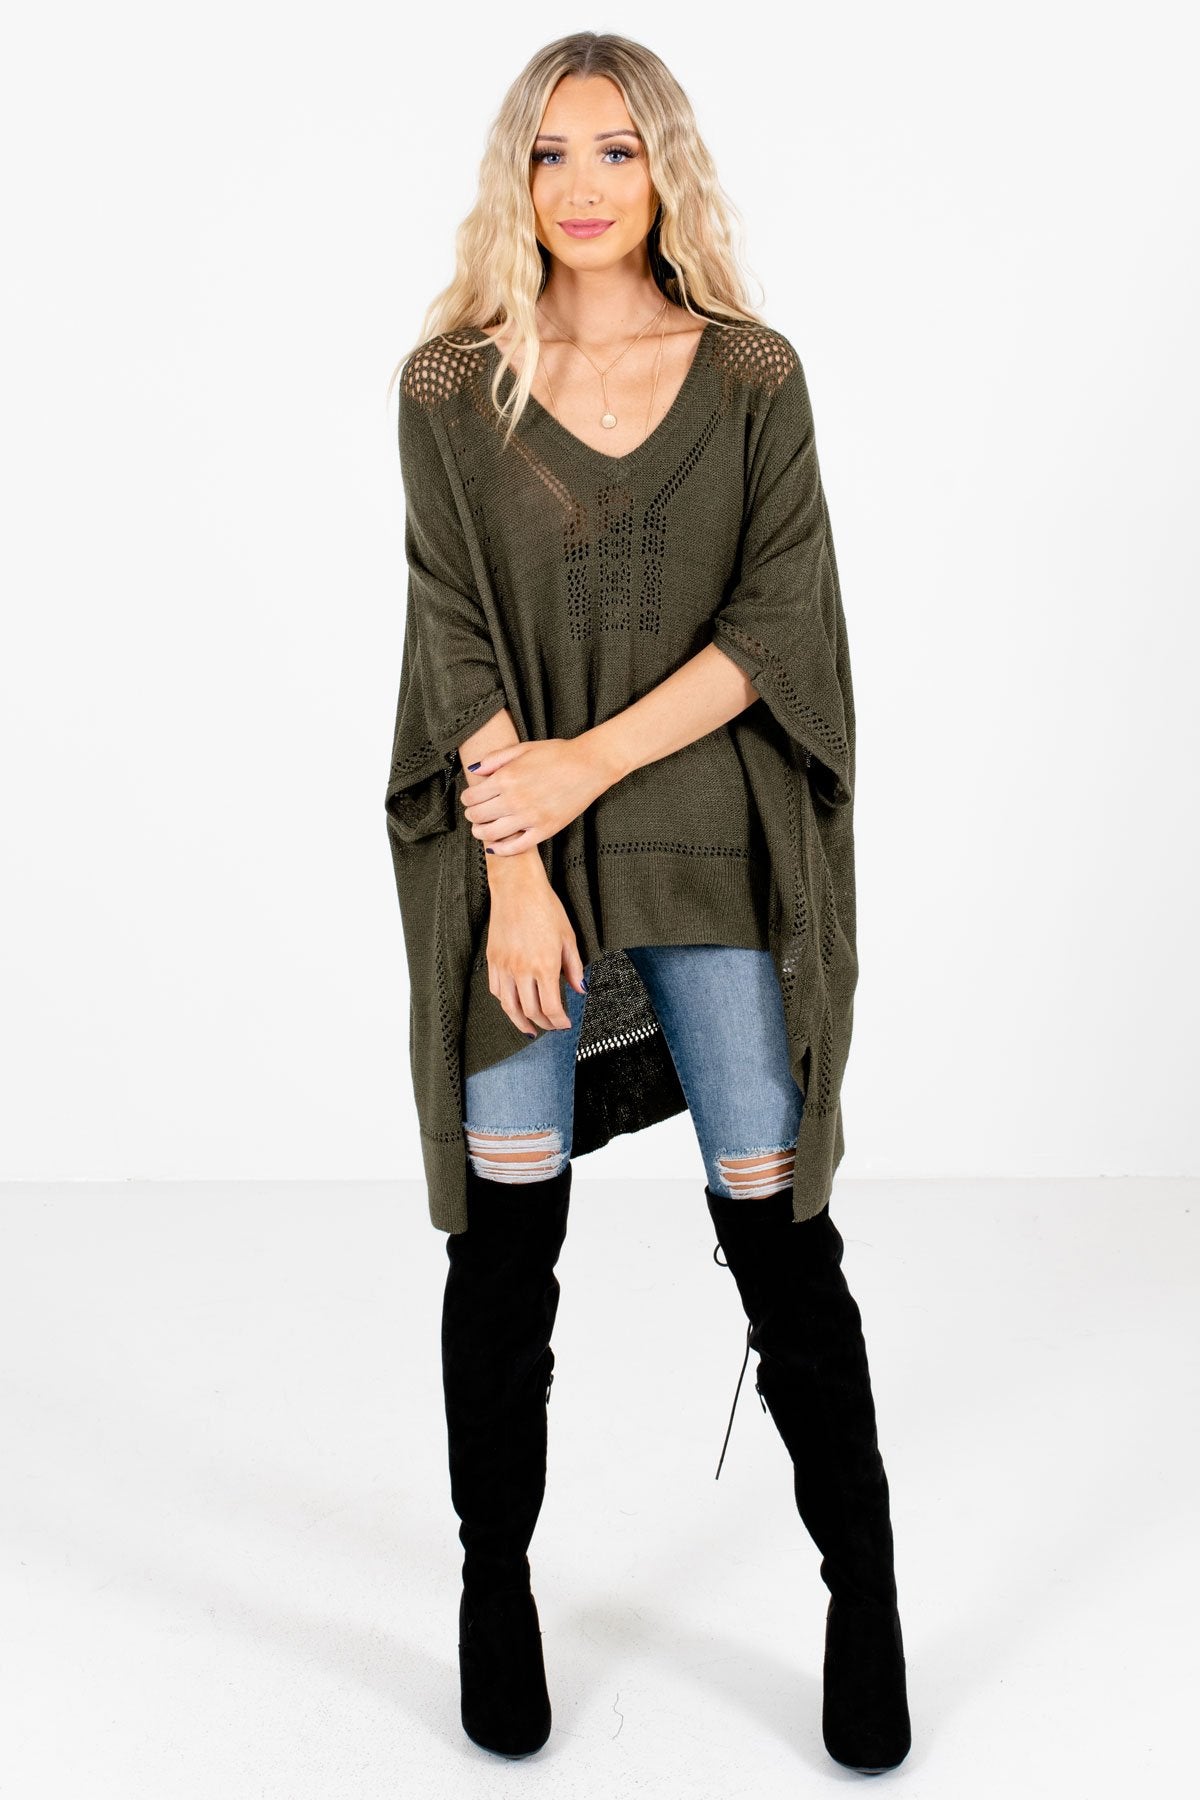 Women’s Olive Green Casual Everyday Boutique Ponchos